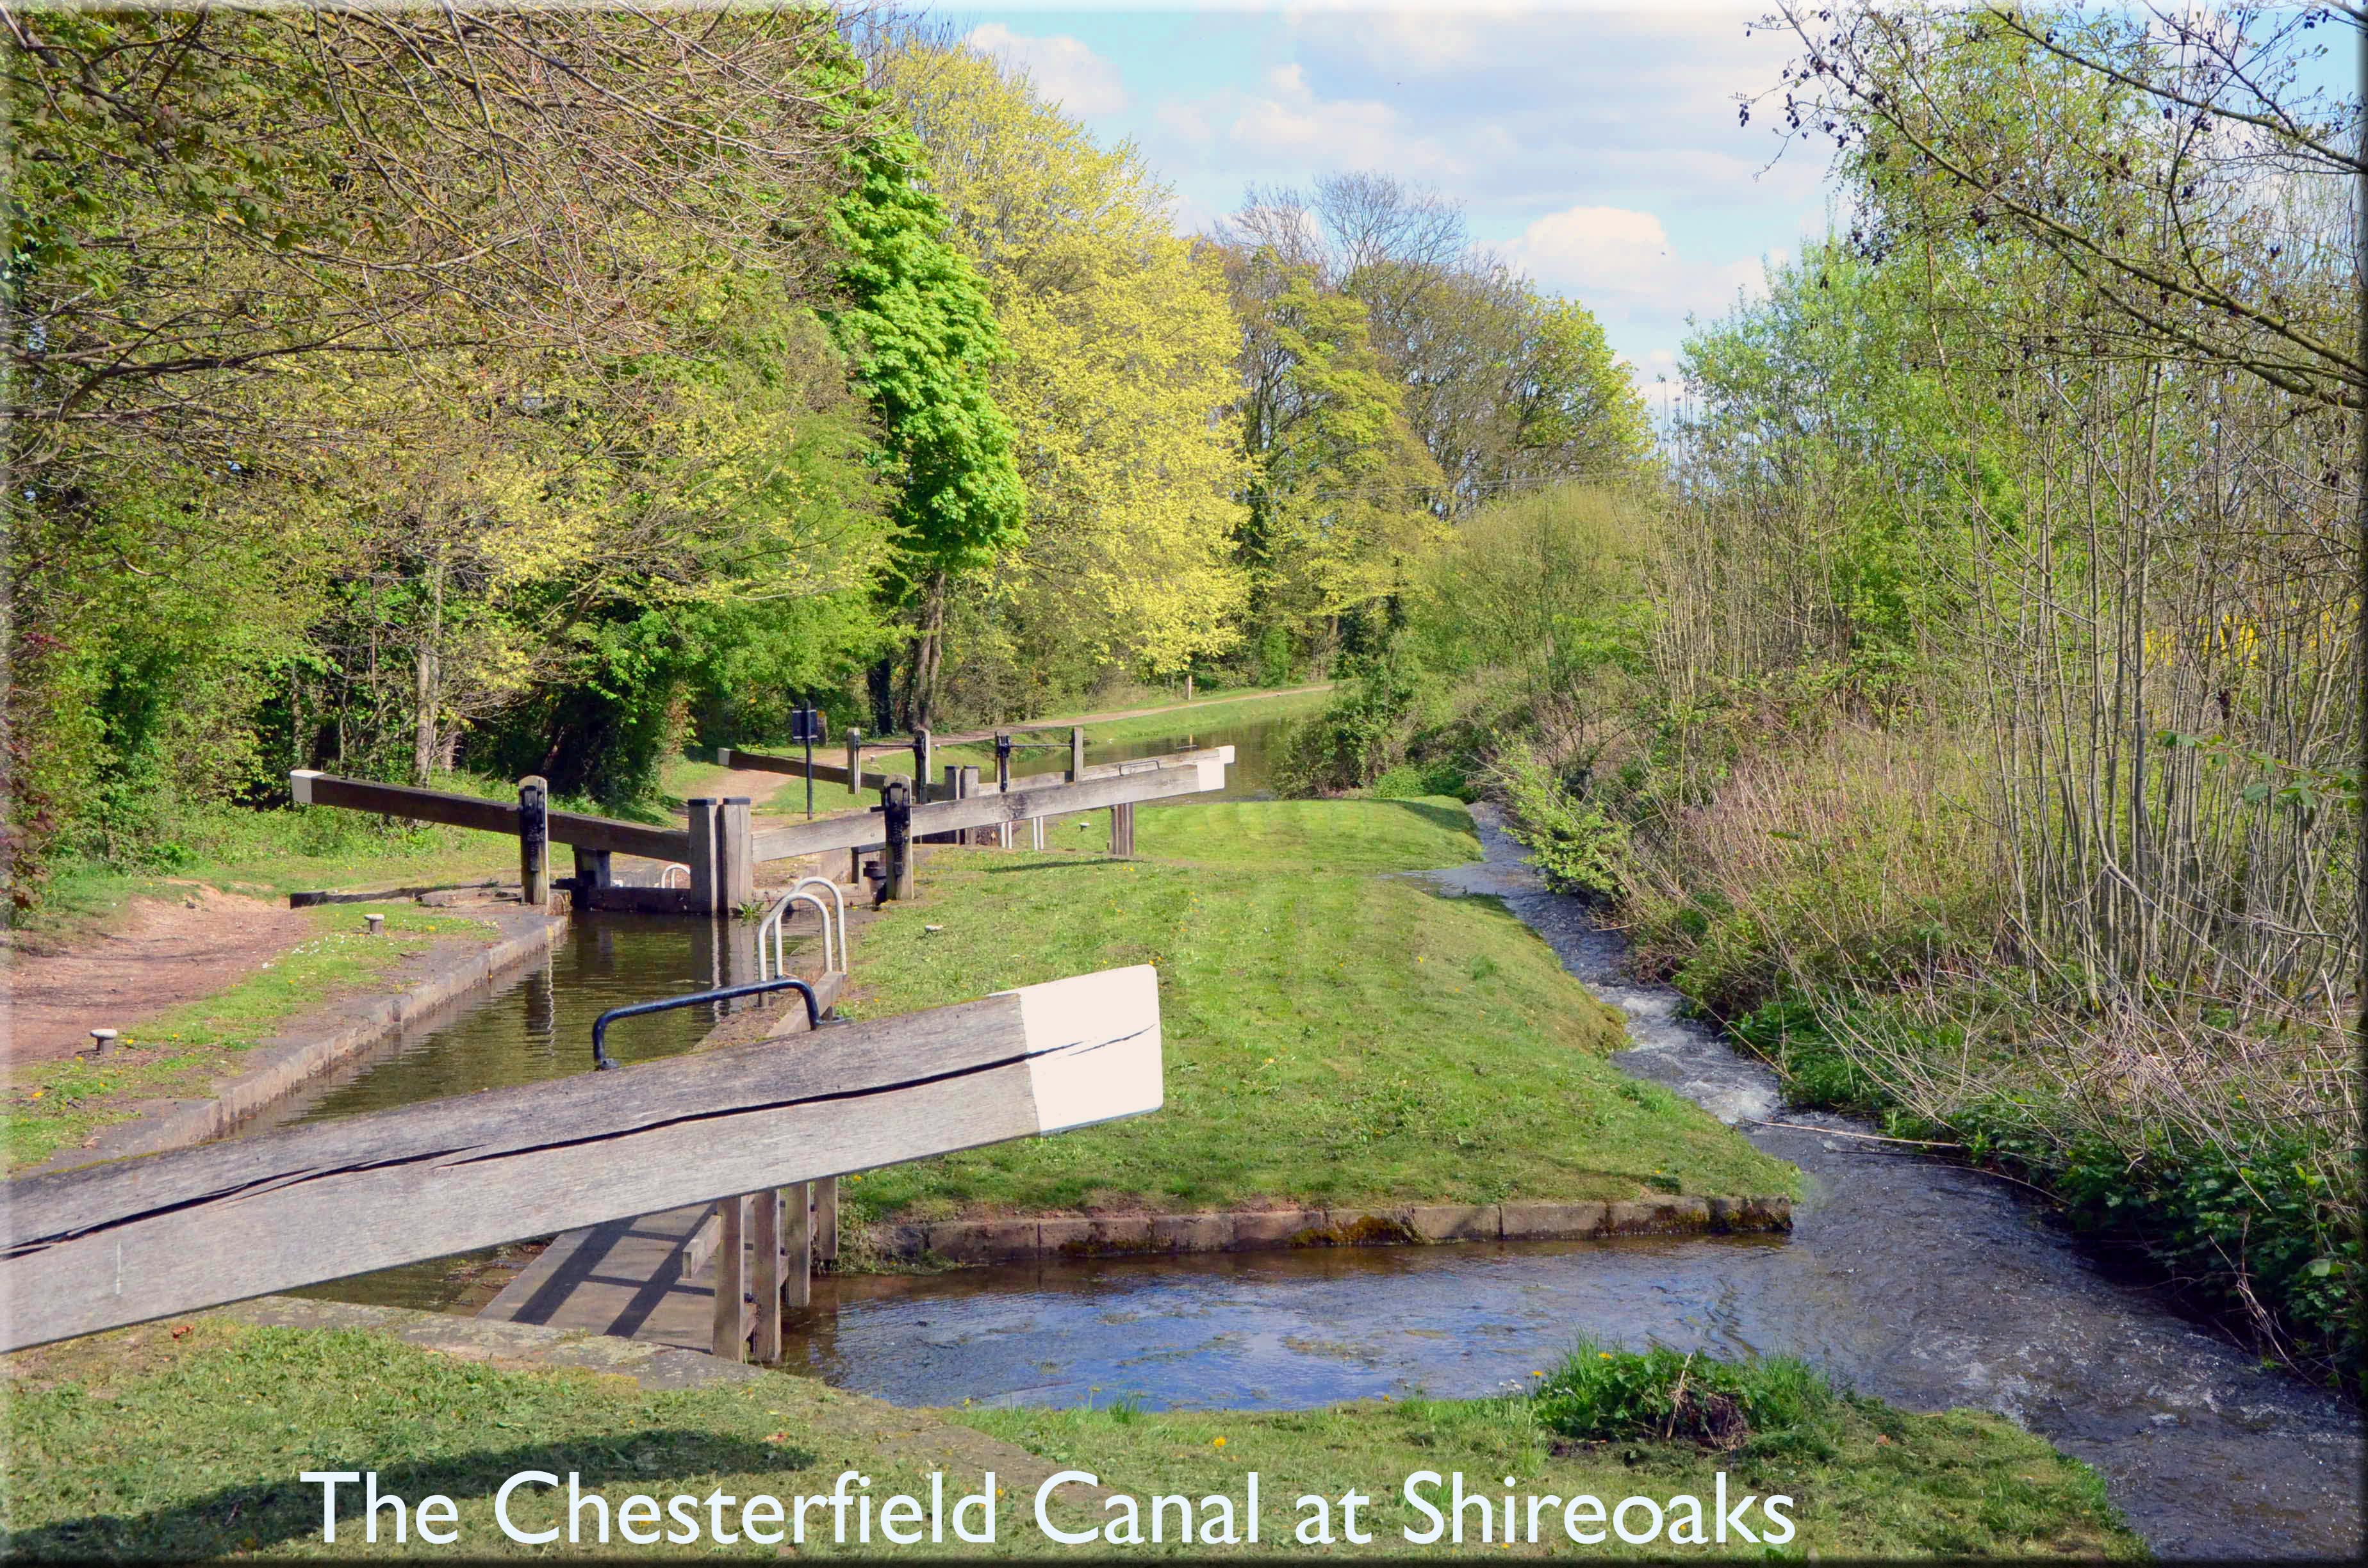 Chesterfield canal at Shireoaks in spring